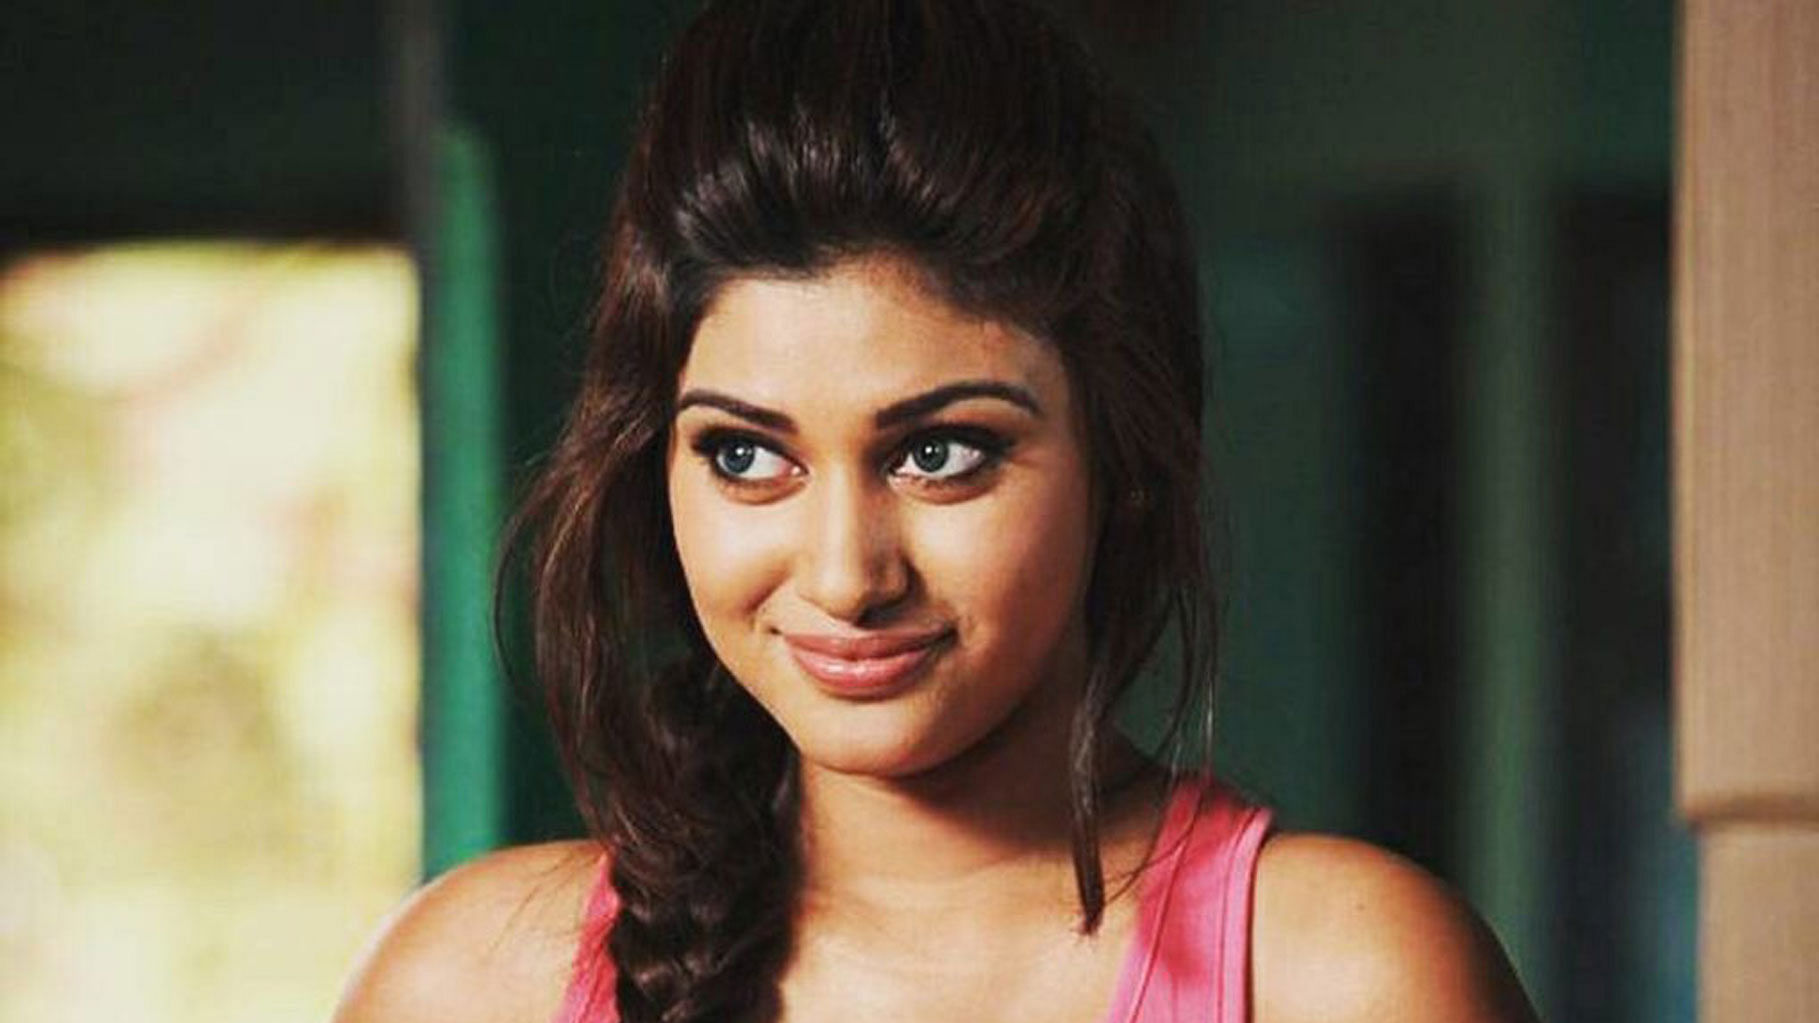 Oviya, an actress across Tamil and Malayalam cinema, is currently a cultural phenomenon on social media. She is one of the contestants on Bigg Boss Tamil.